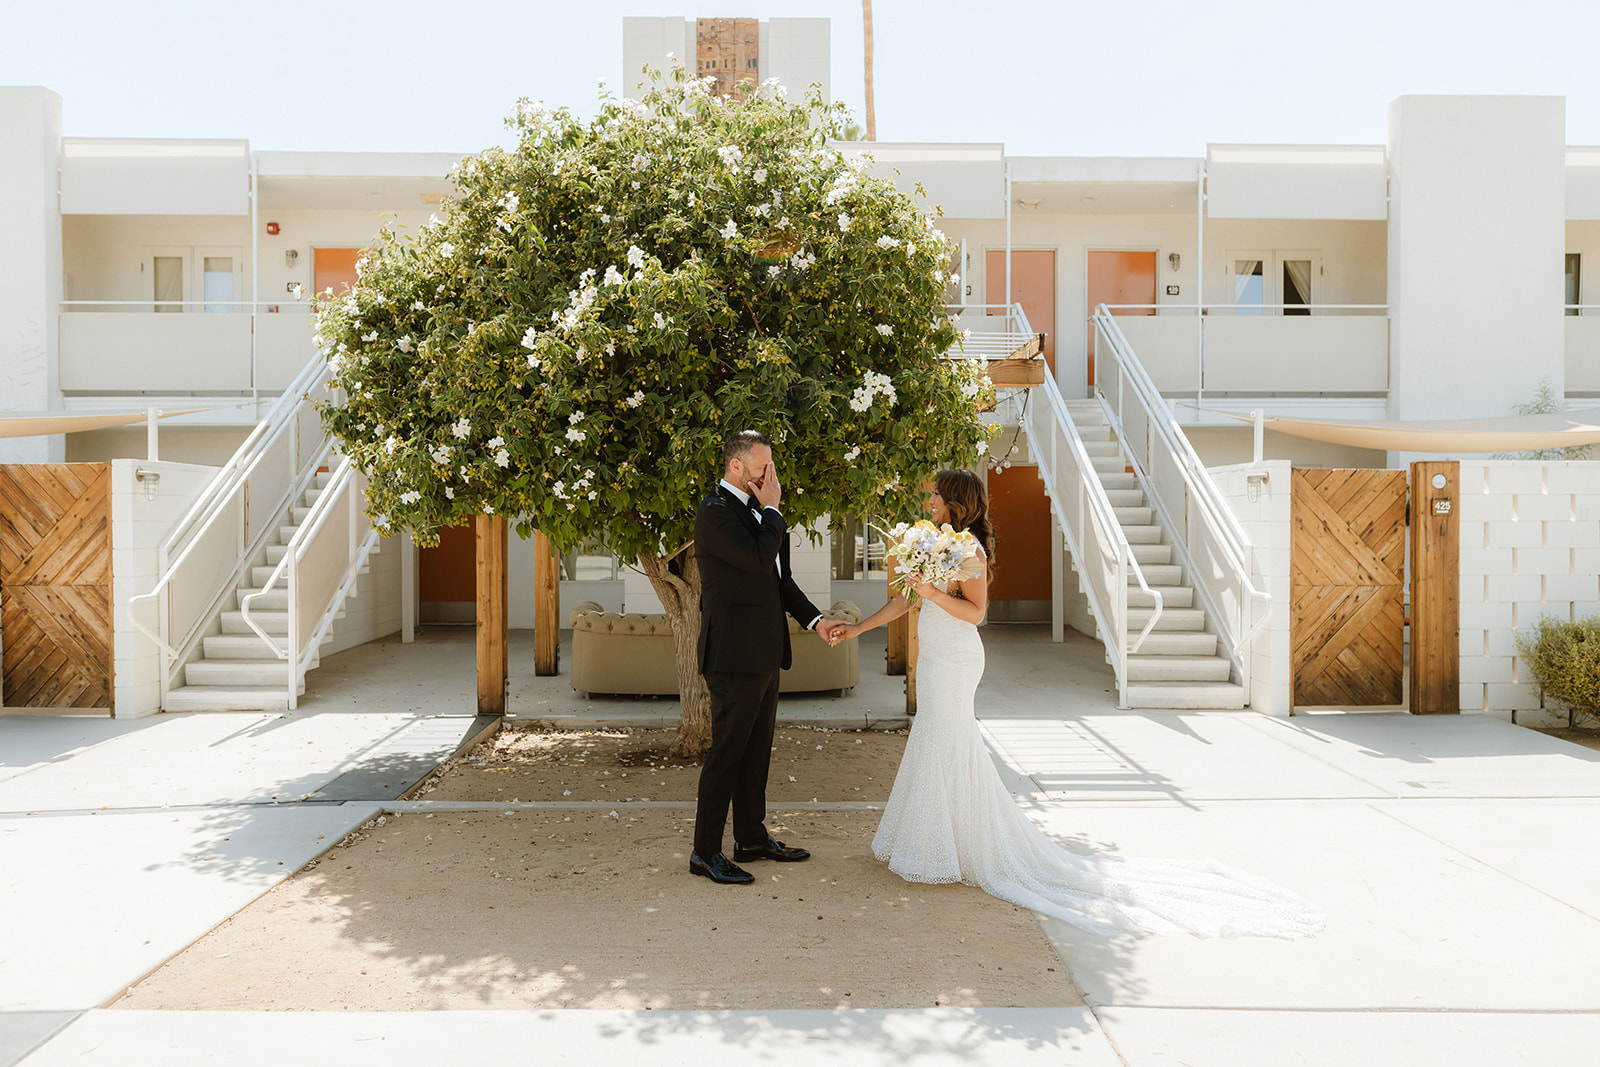 A wedding couple shares a first look together at their poolside palm springs wedding.